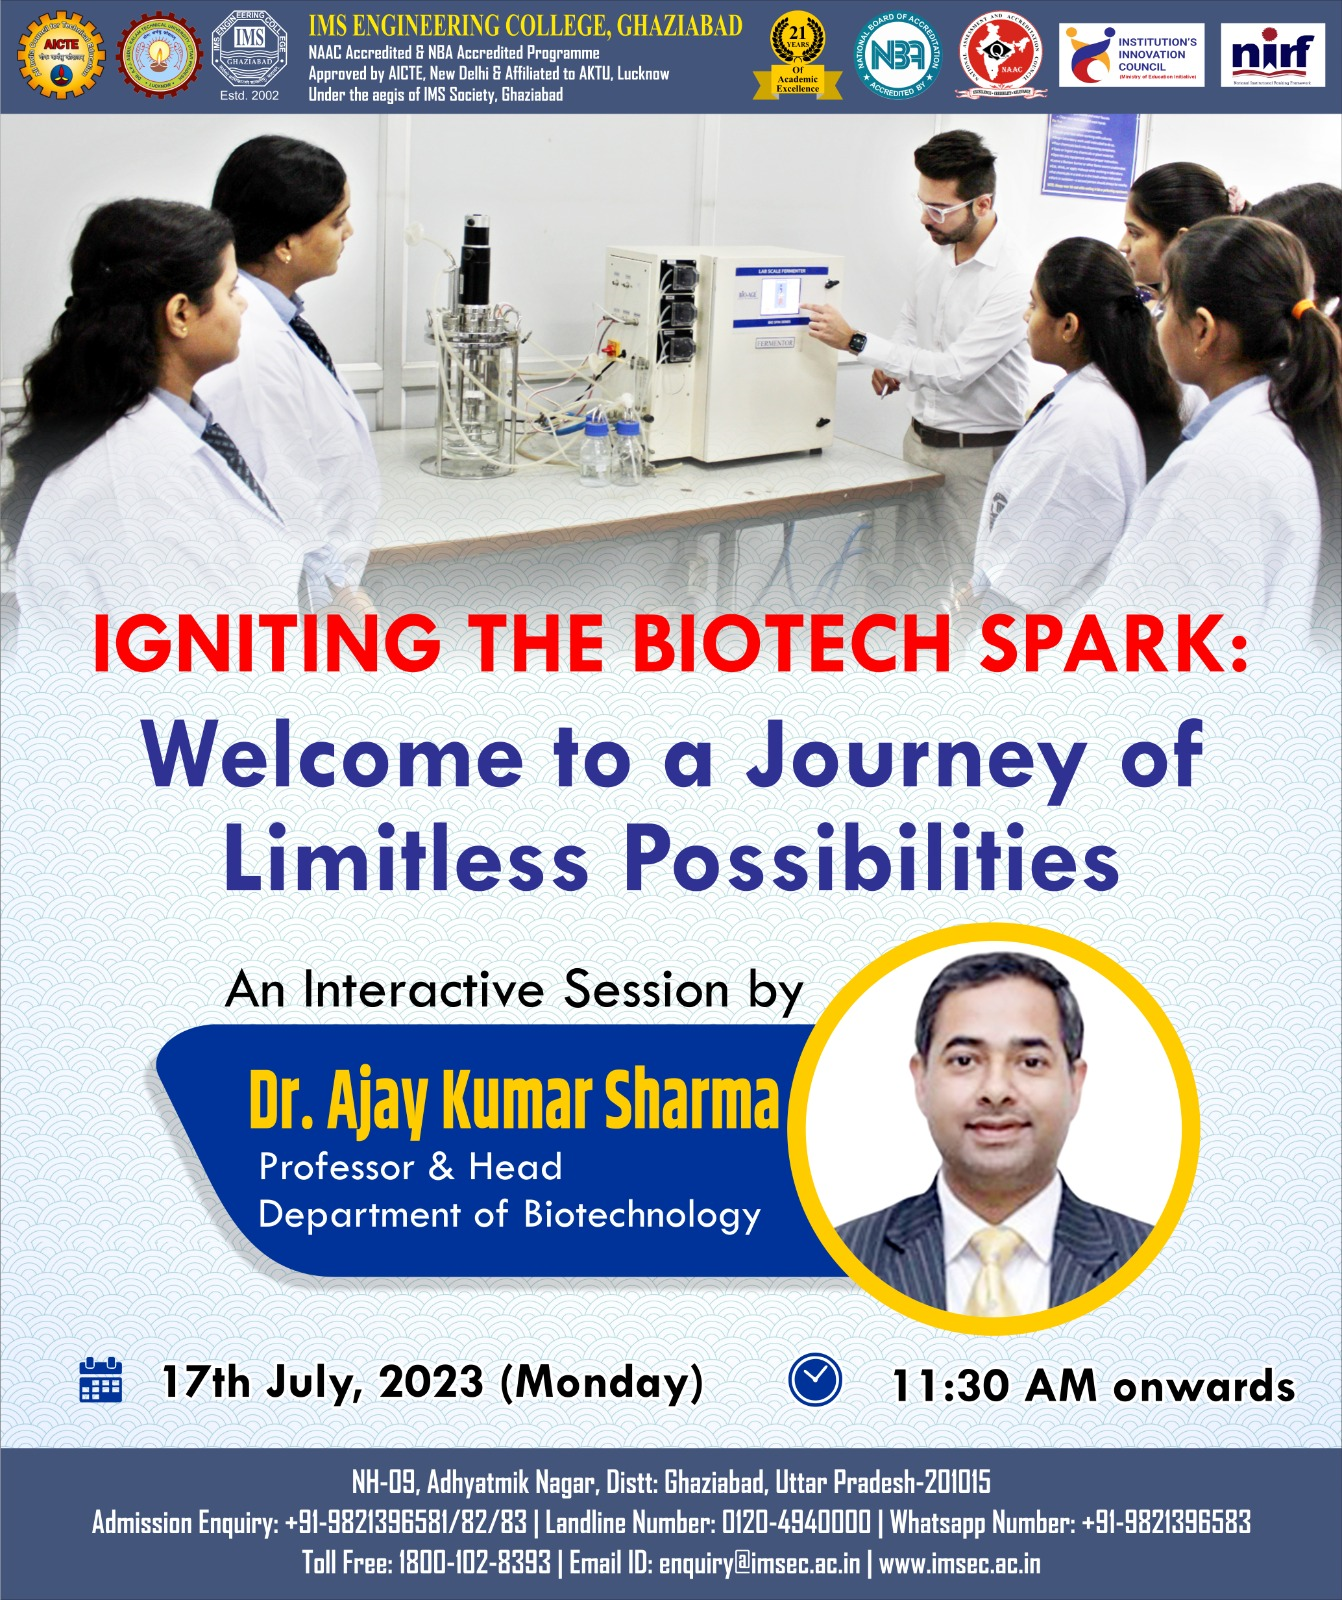 Expert talk on Igniting the Biotech Spark